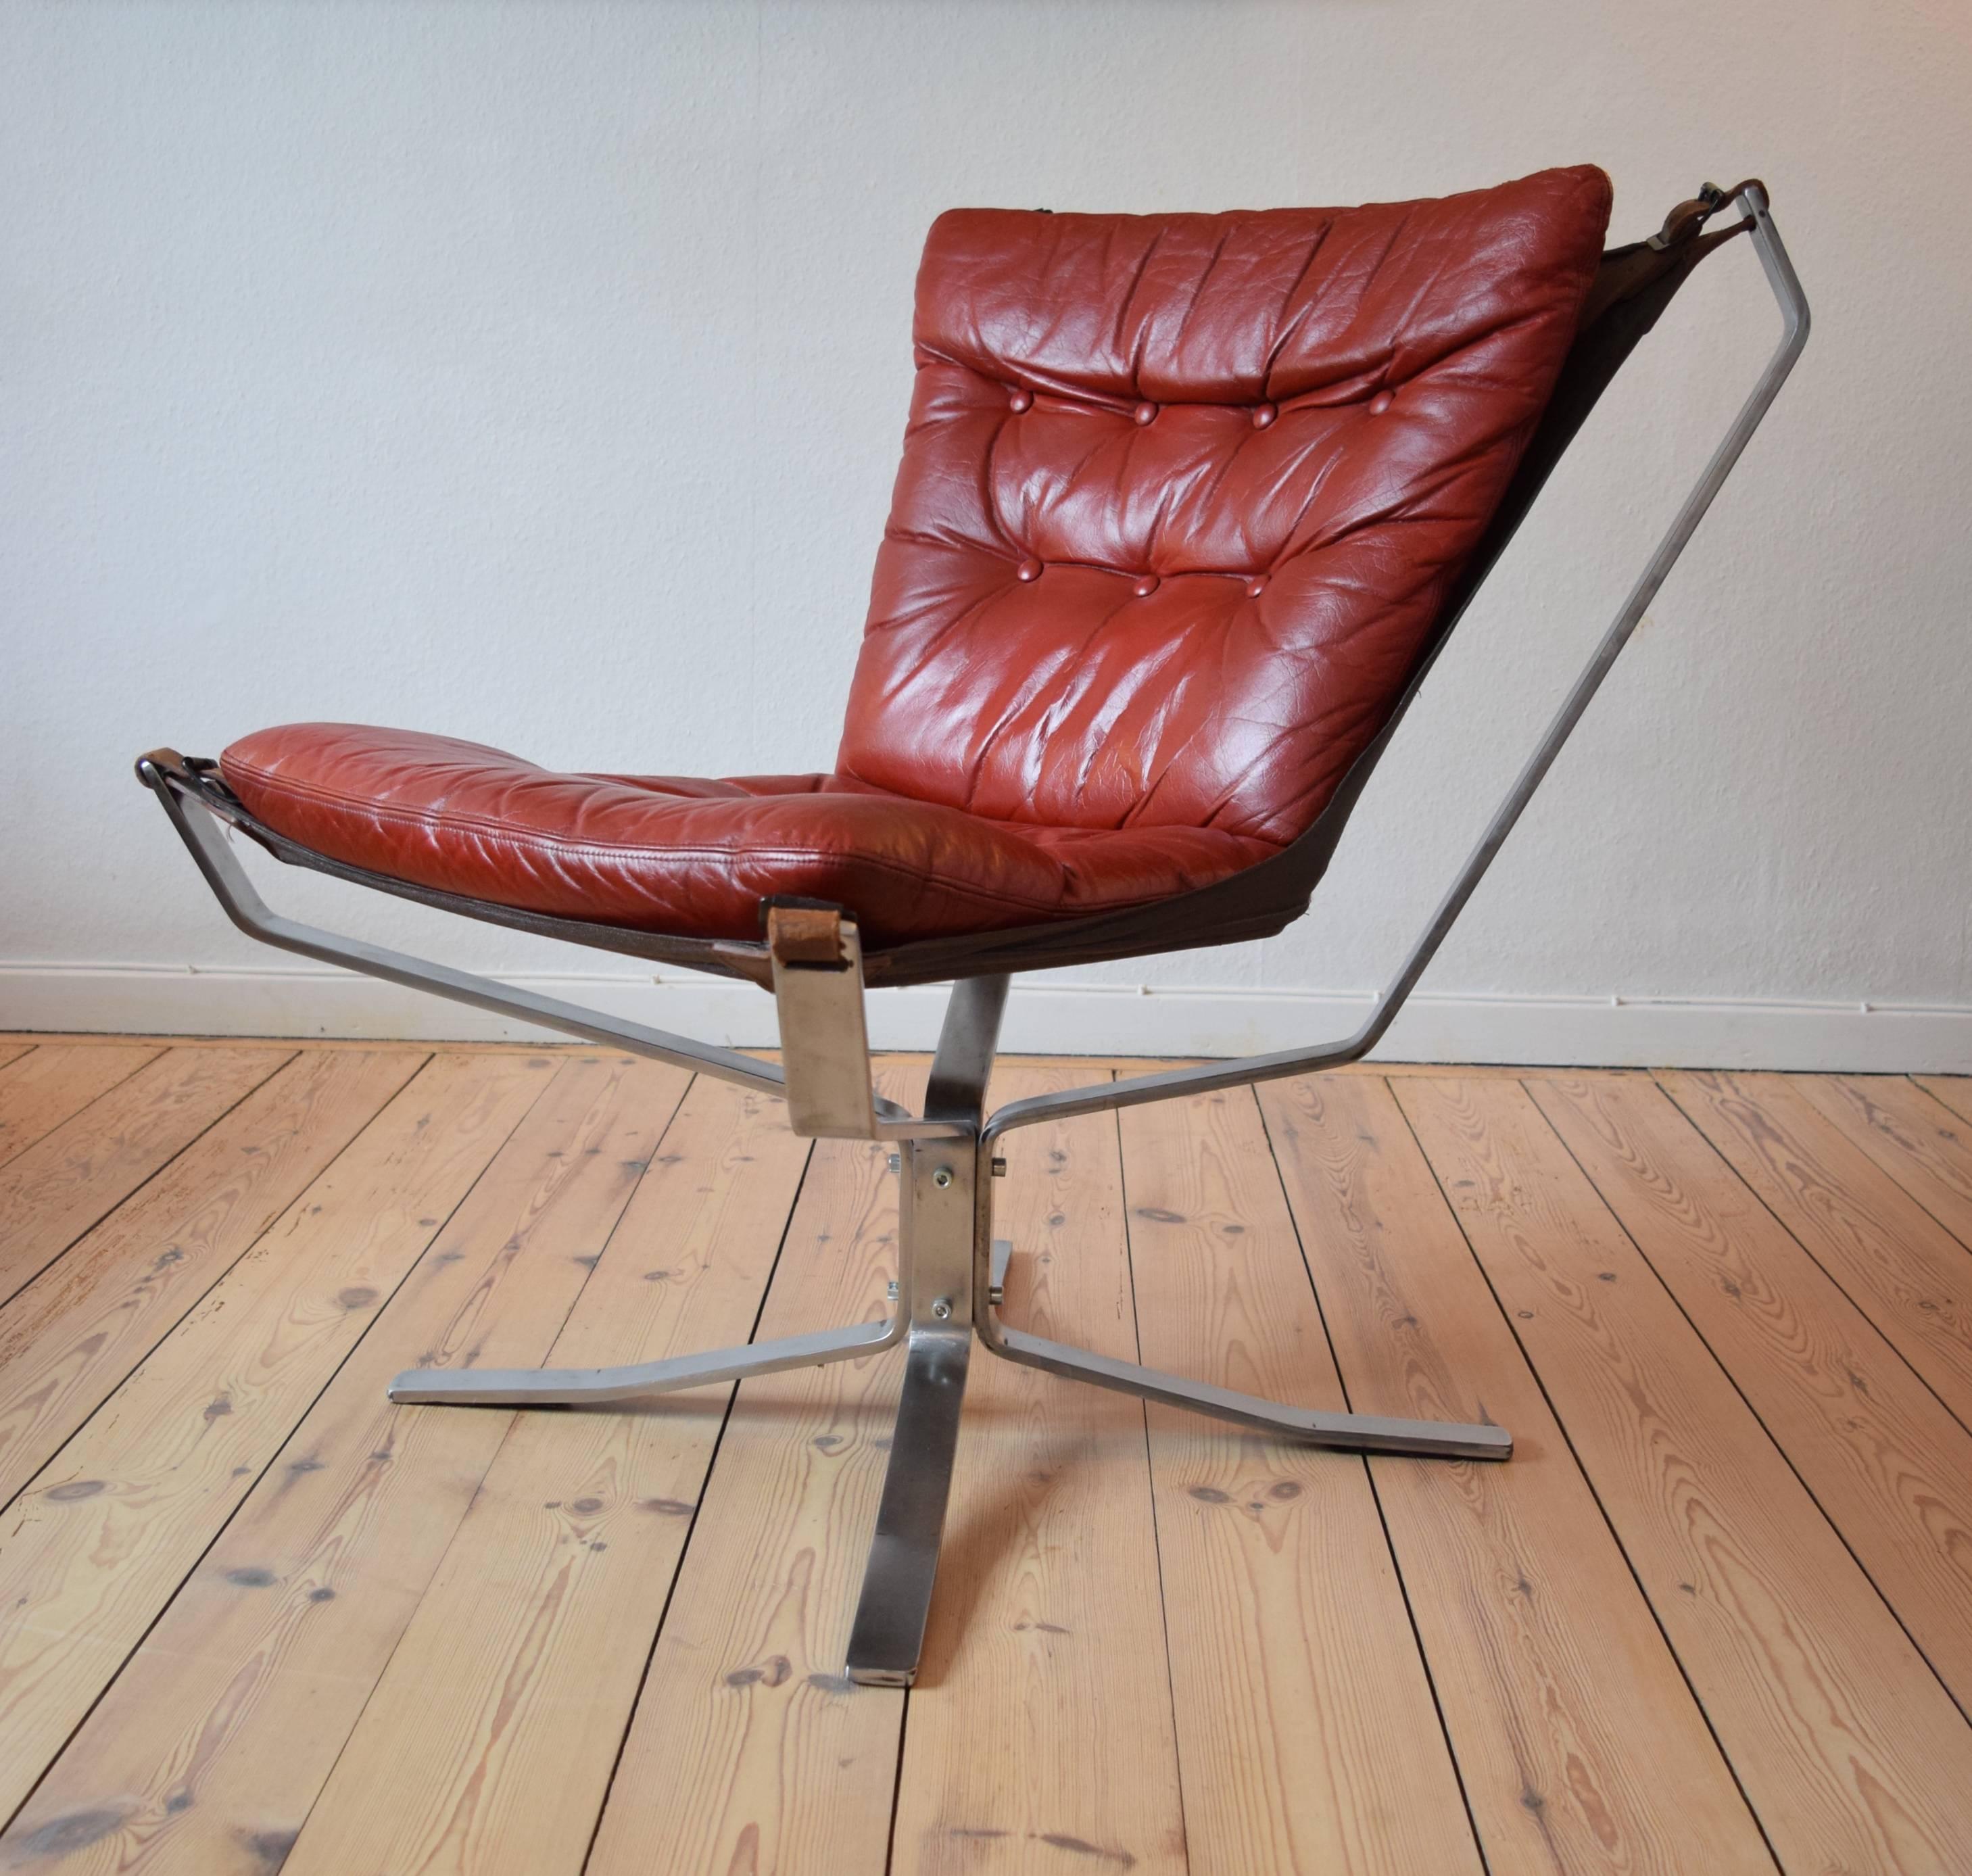 Chrome base Falcon chair designed by Sigurd Ressell and manufactured in Denmark in the 1970s. Features red leather cushion and sits on a vinyl hammock. Apart from some minor marks here and there this item is in a very good vintage condition. Legs